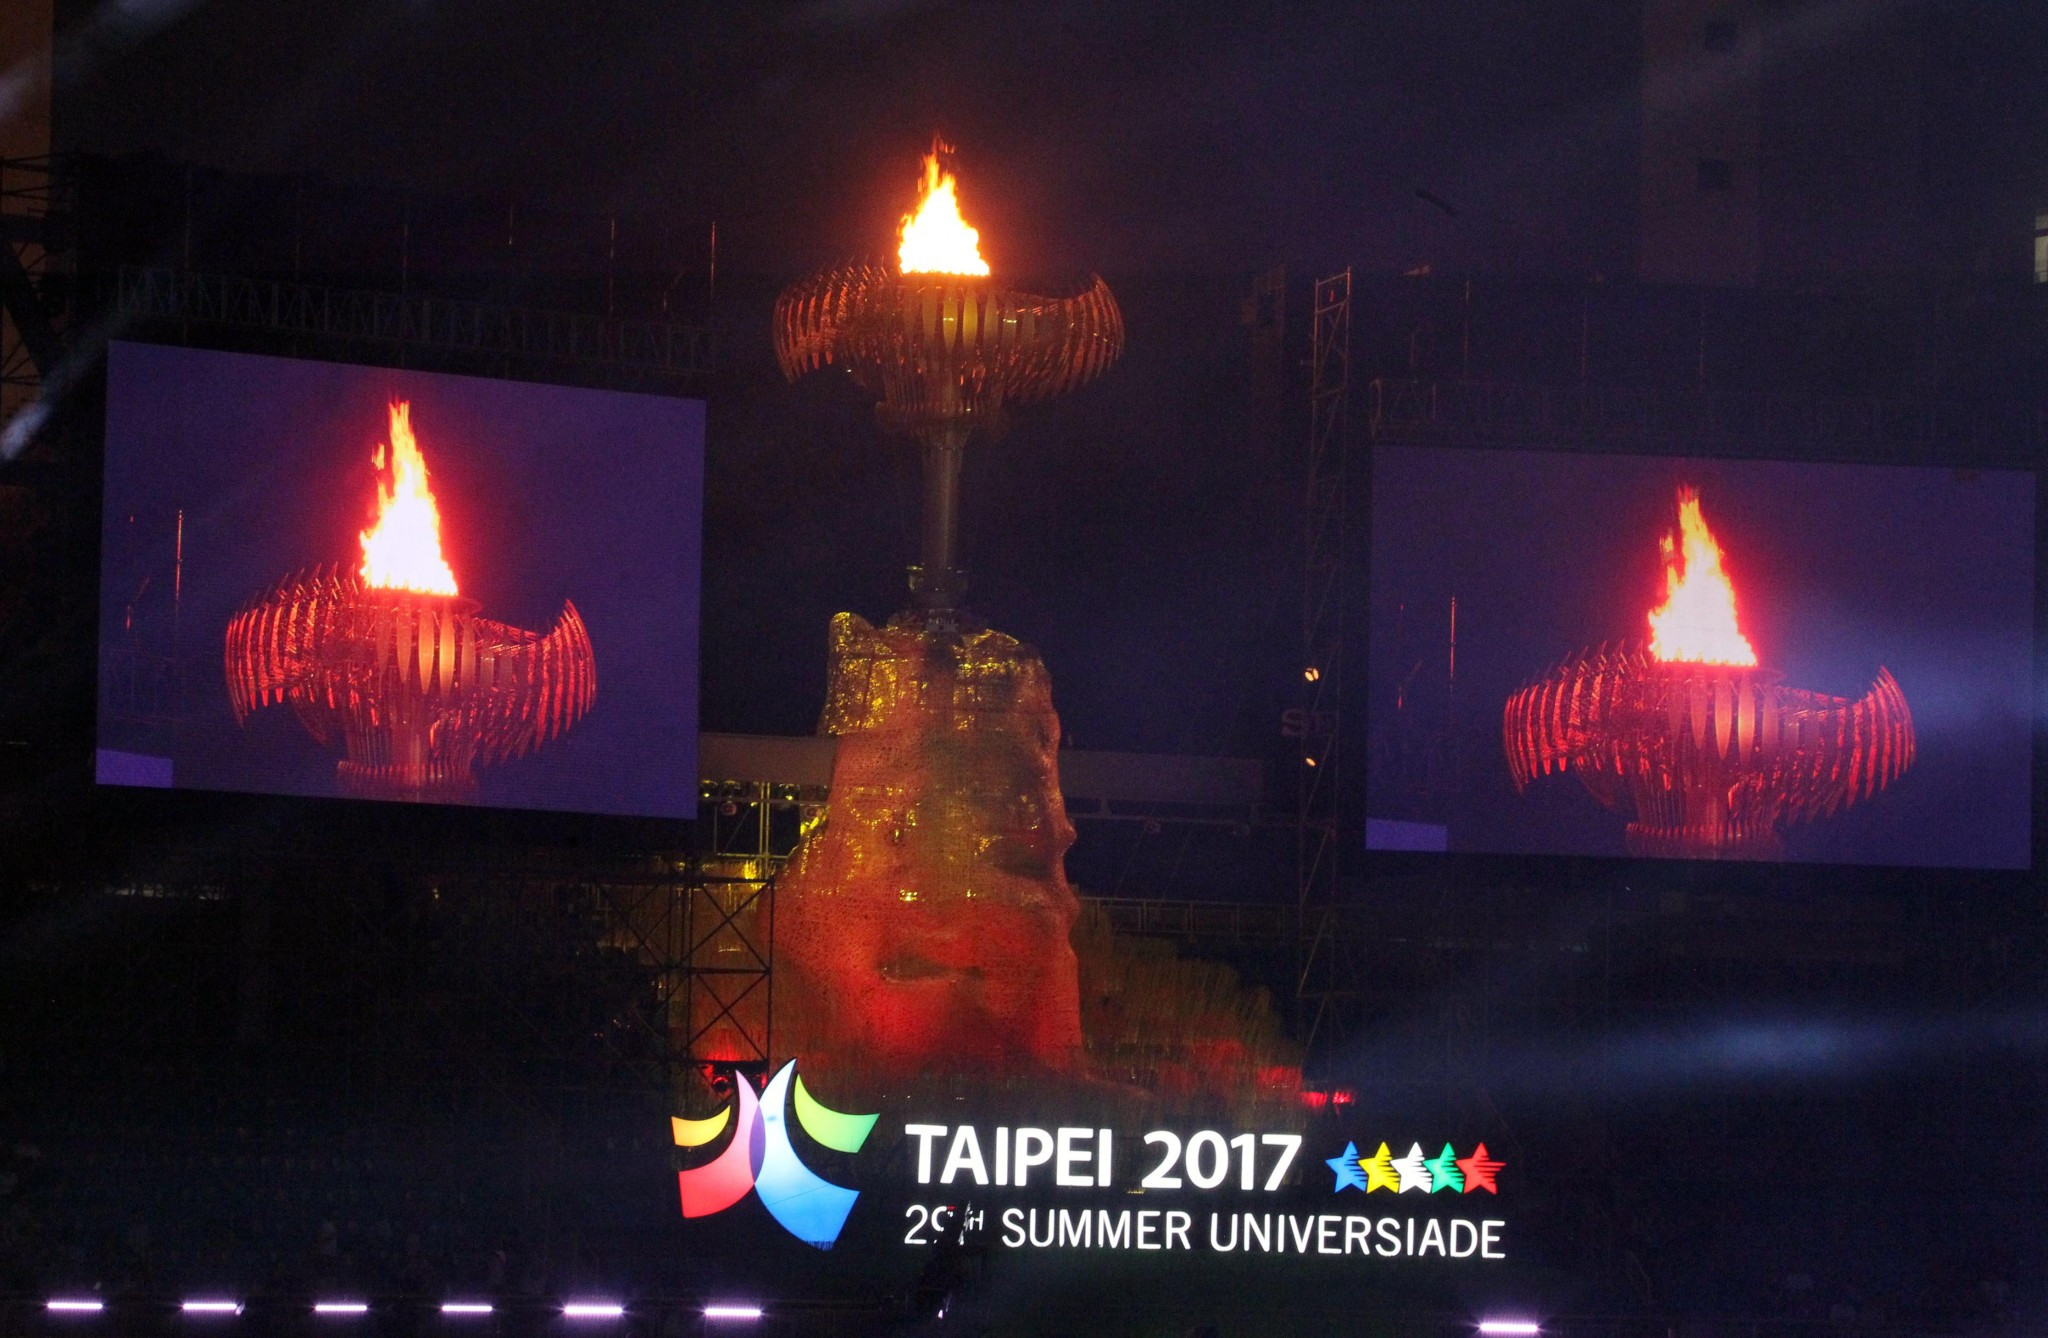 insidethegames is reporting LIVE from the Summer Universiade in Taipei